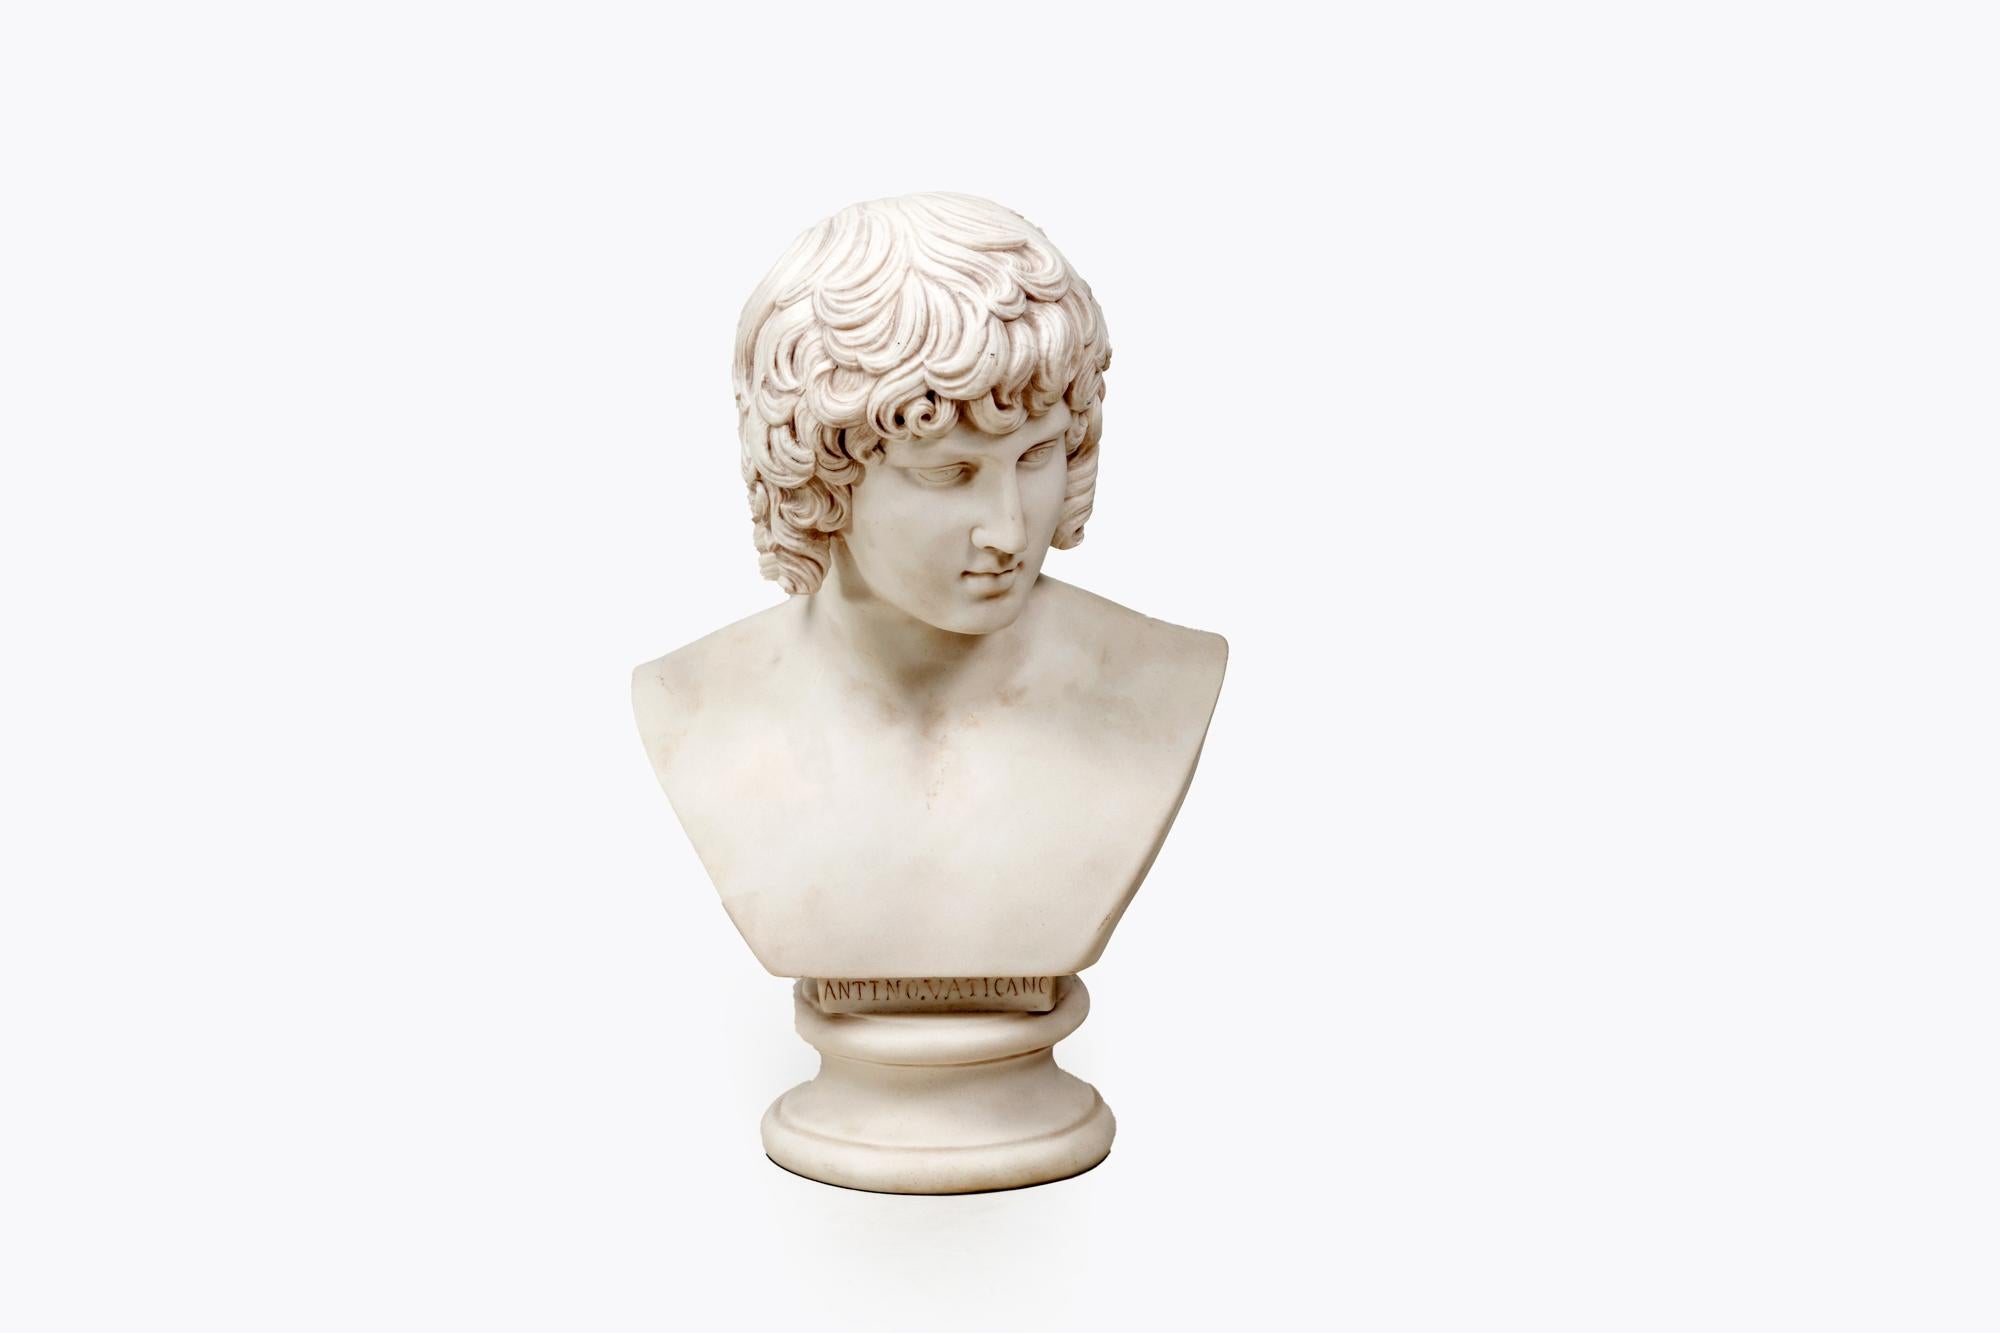 19th Century Marble Bust of Antinous after the original known as the 'Antinous Vaticano' discovered at Hadrian's Villa. Featuring realistic detail to hair and handsome facial features. With inscription ‘Antino Vaticano’ to base.